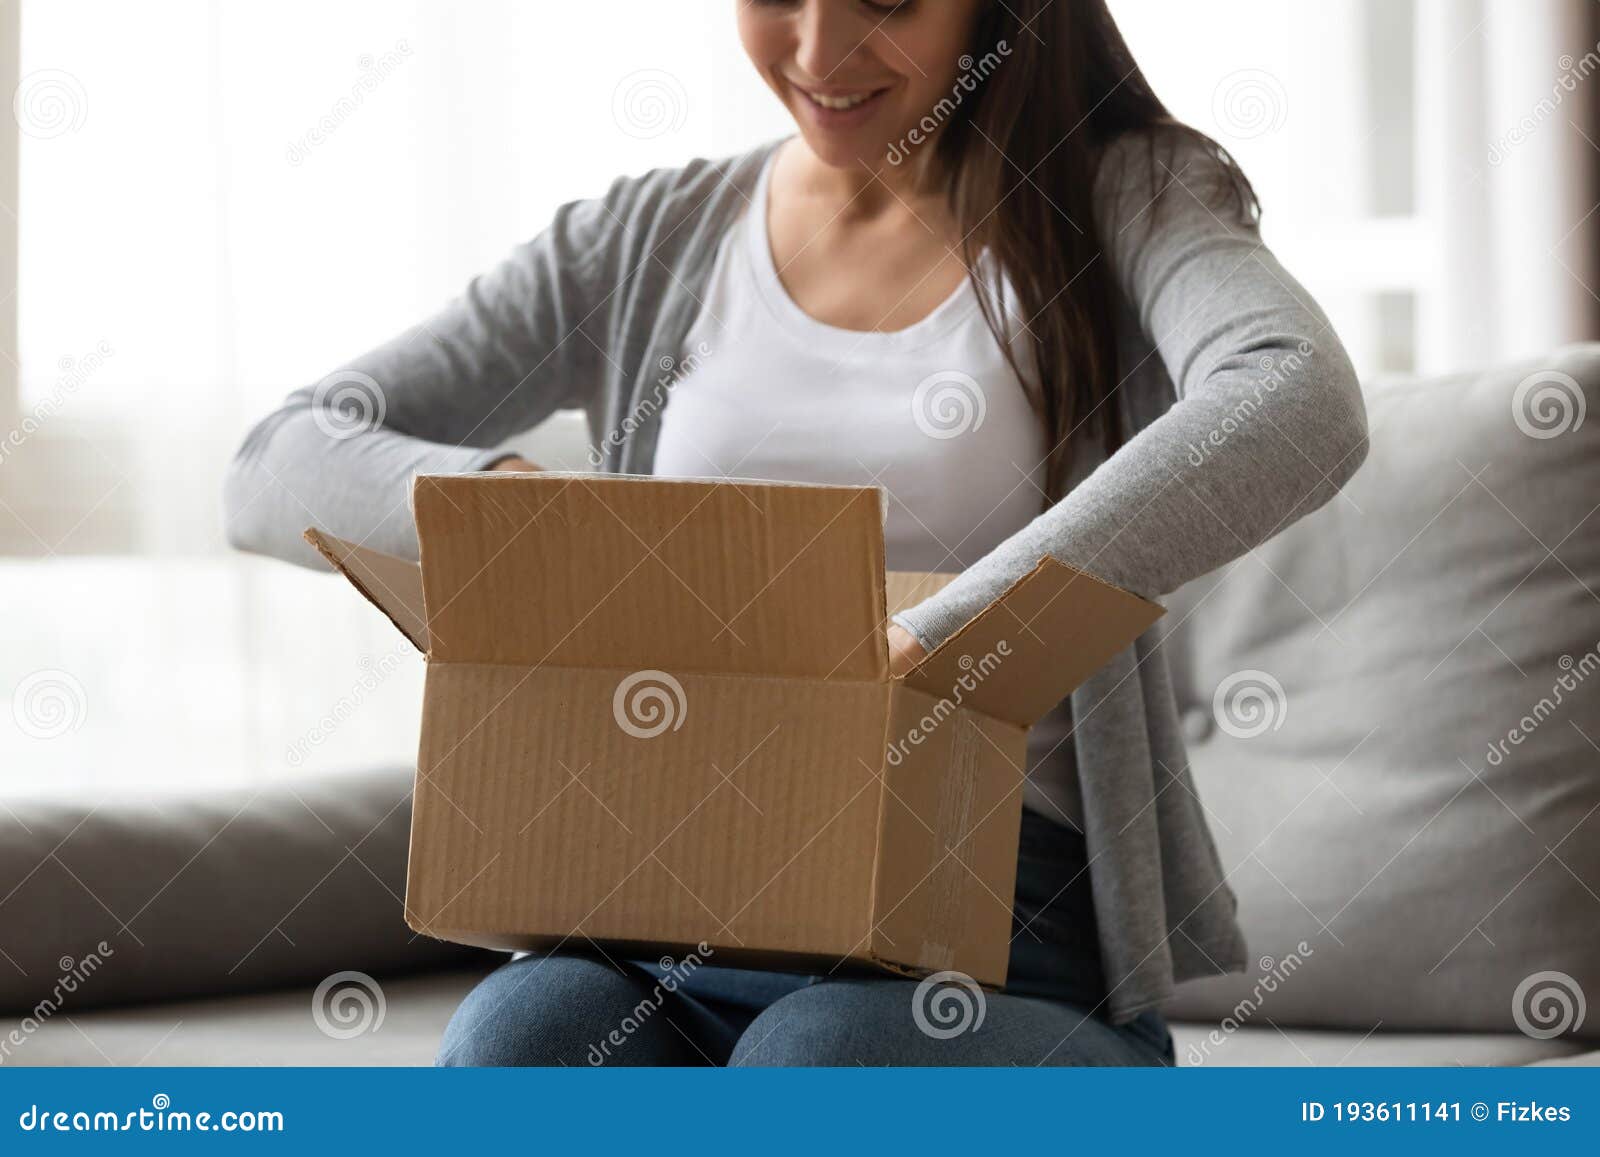 happy young woman unboxing cardboard parcel at home.